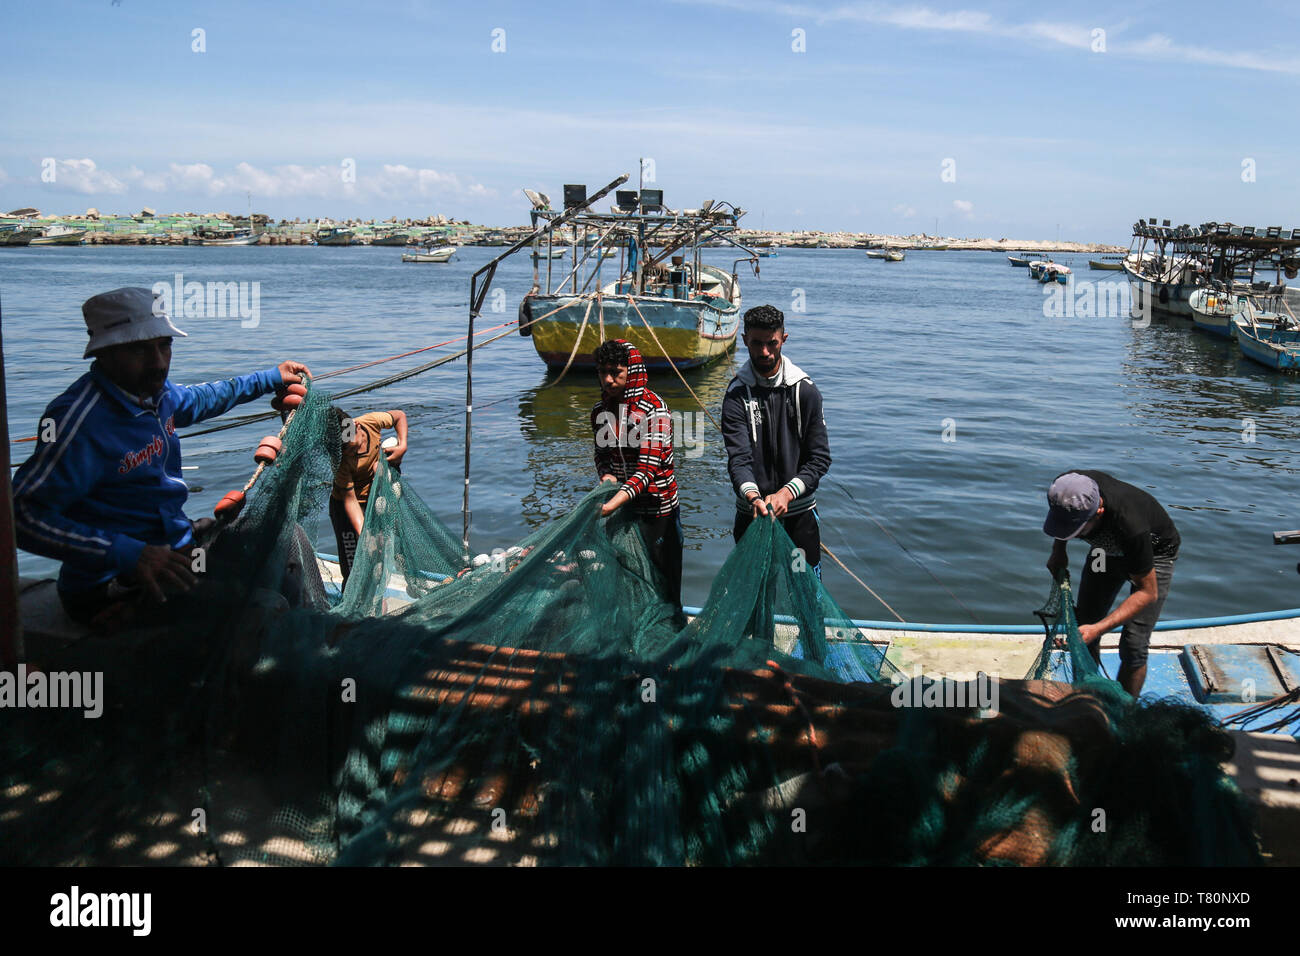 Gaza, Palestine. 10th May, 2019. Palestinian fishermen work at the seaport in Gaza, May 10, 2019. Israel announced it is loosening restrictions on fishermen off the blockaded Gaza Strip by allowing them to travel up to 12 nautical miles into the Mediterranean. Credit: Stringer/Xinhua/Alamy Live News Stock Photo